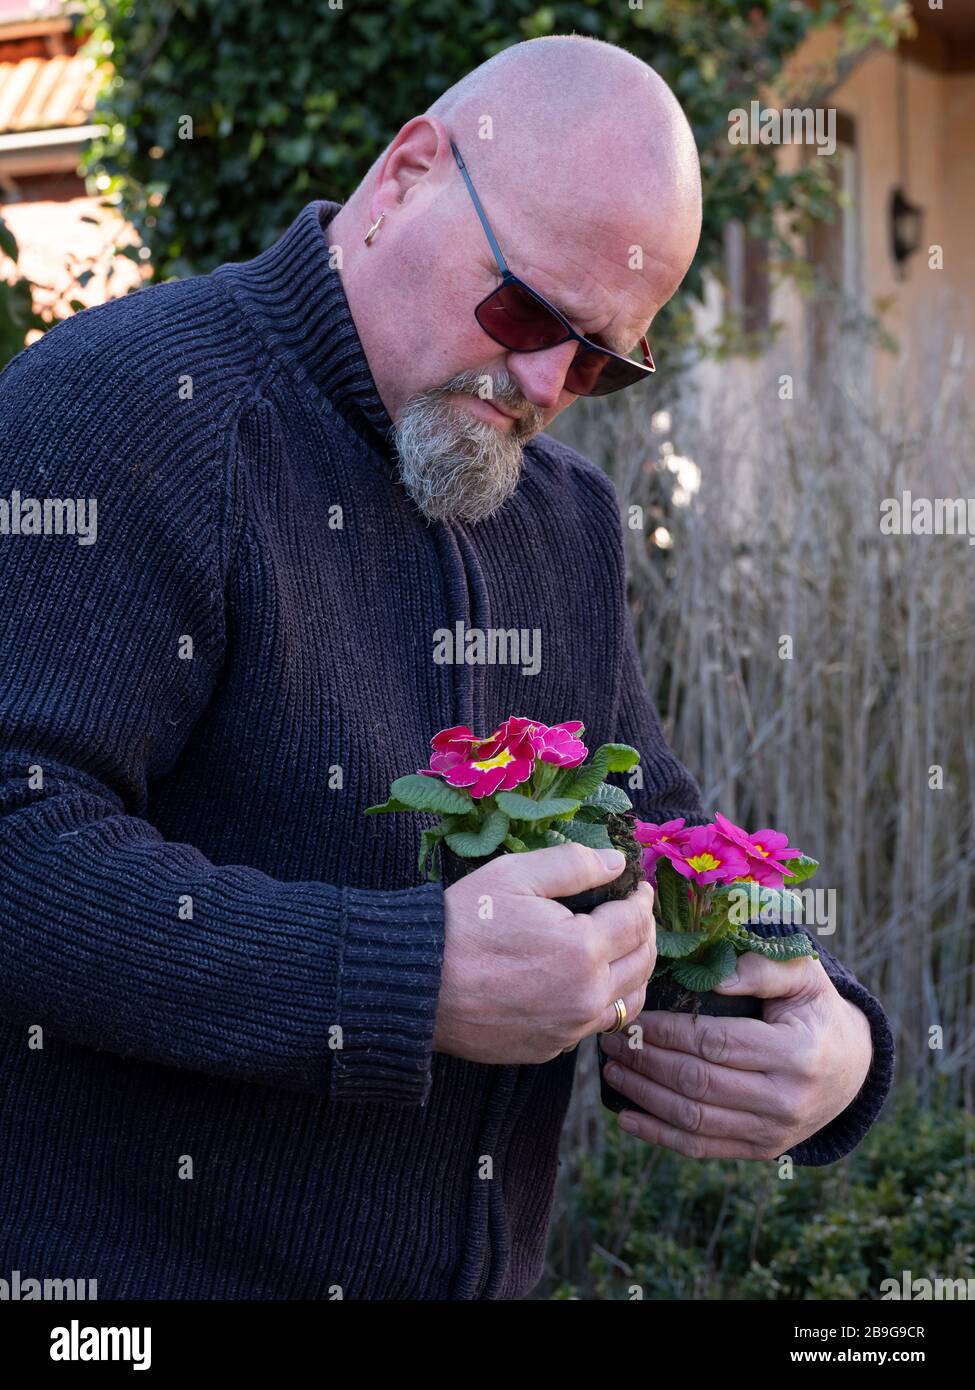 Elderly bald man is standing in the garden with pink primulas in a plastic flower pot in his hands. Pink Primrose Primula Vulgaris. Country Garden Stock Photo